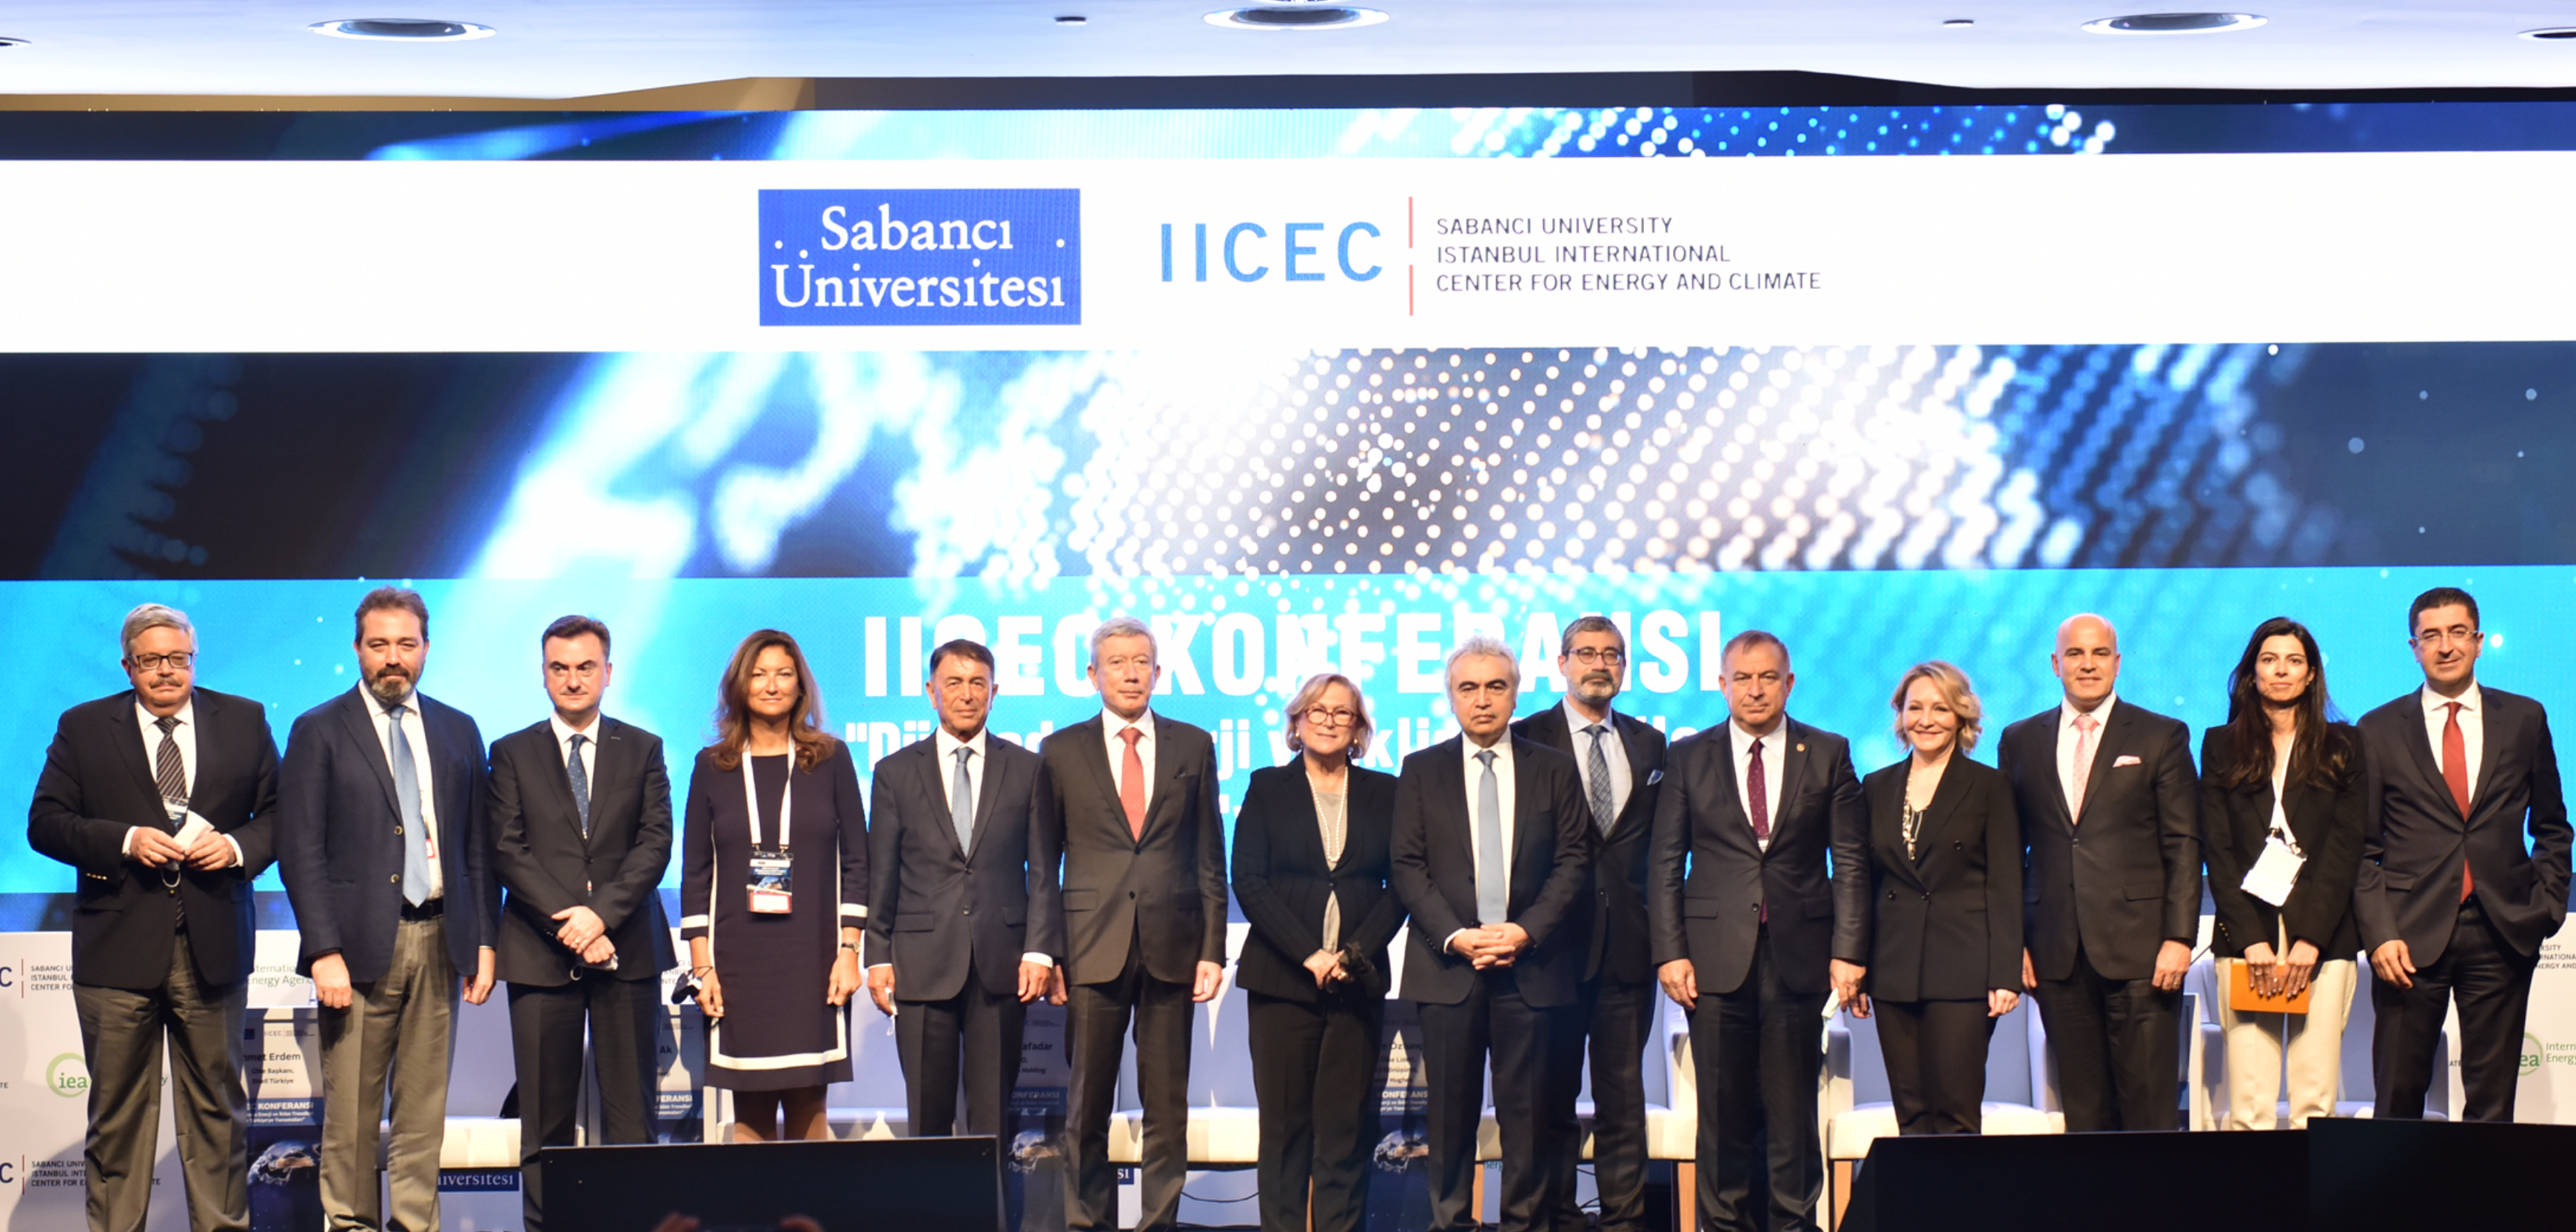 IICEC’s Conference Entitled ‘Global Energy and Climate Trends & Implications for Turkey’ Outlined Latest Trends with Prominent Names